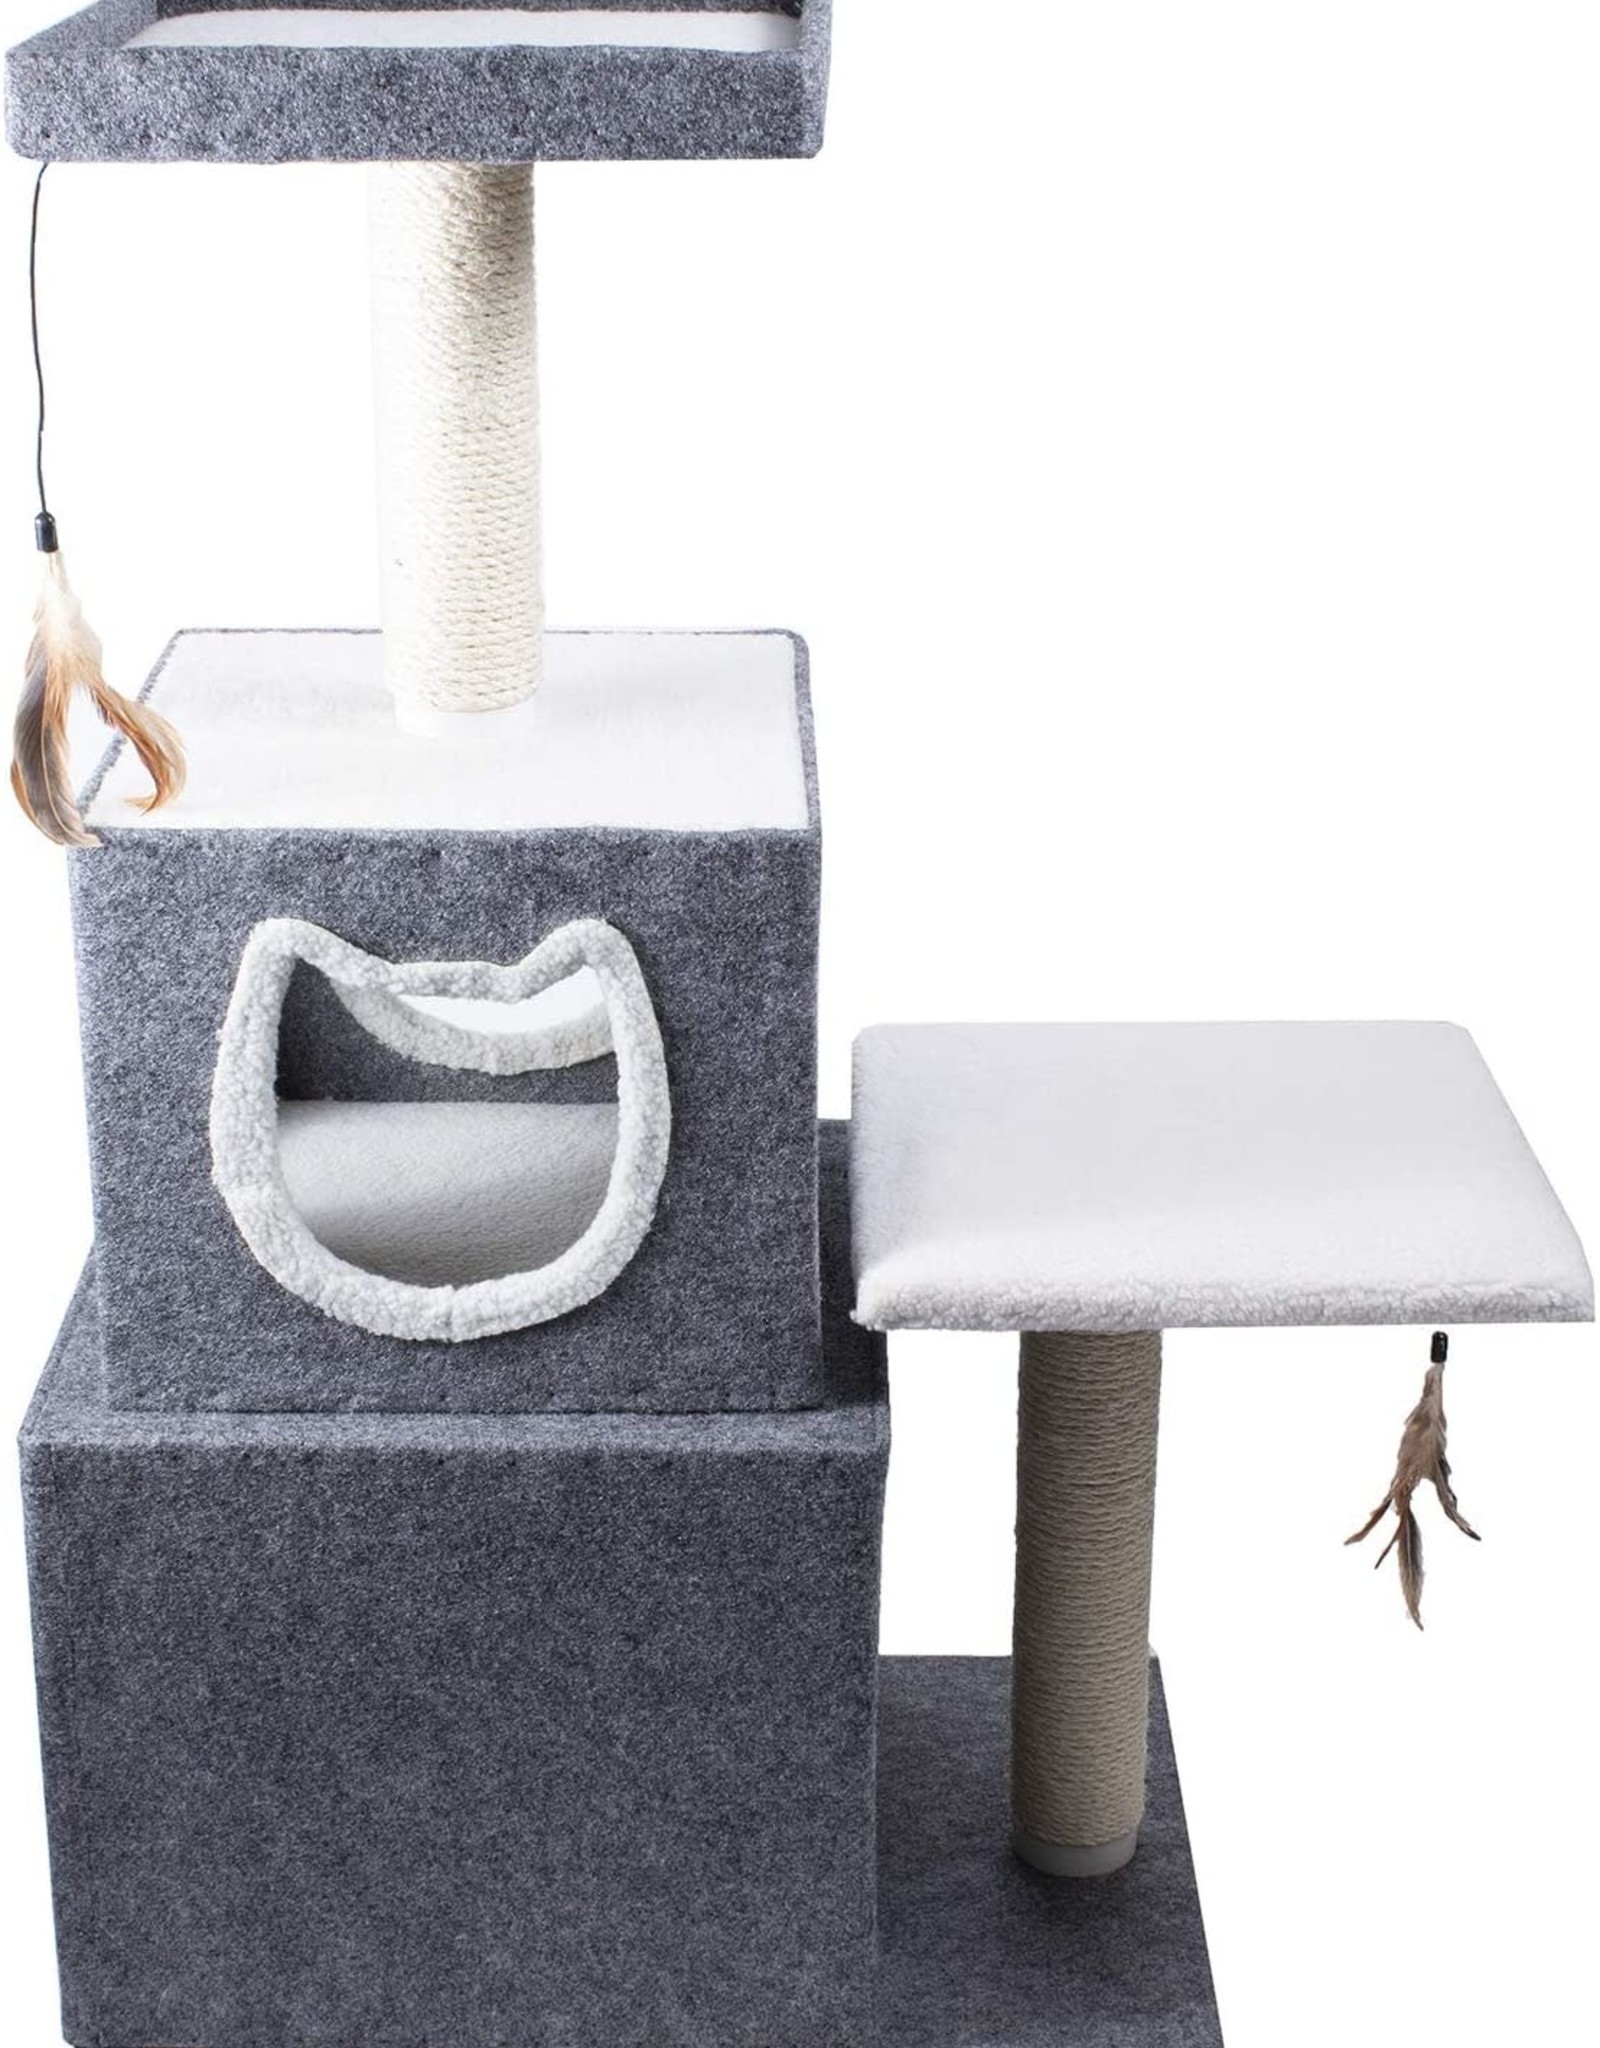 CAT LIFE CATF28- CUBICAL- CAT CONDO- WITH LOUNGING TOWER- 16X28X41